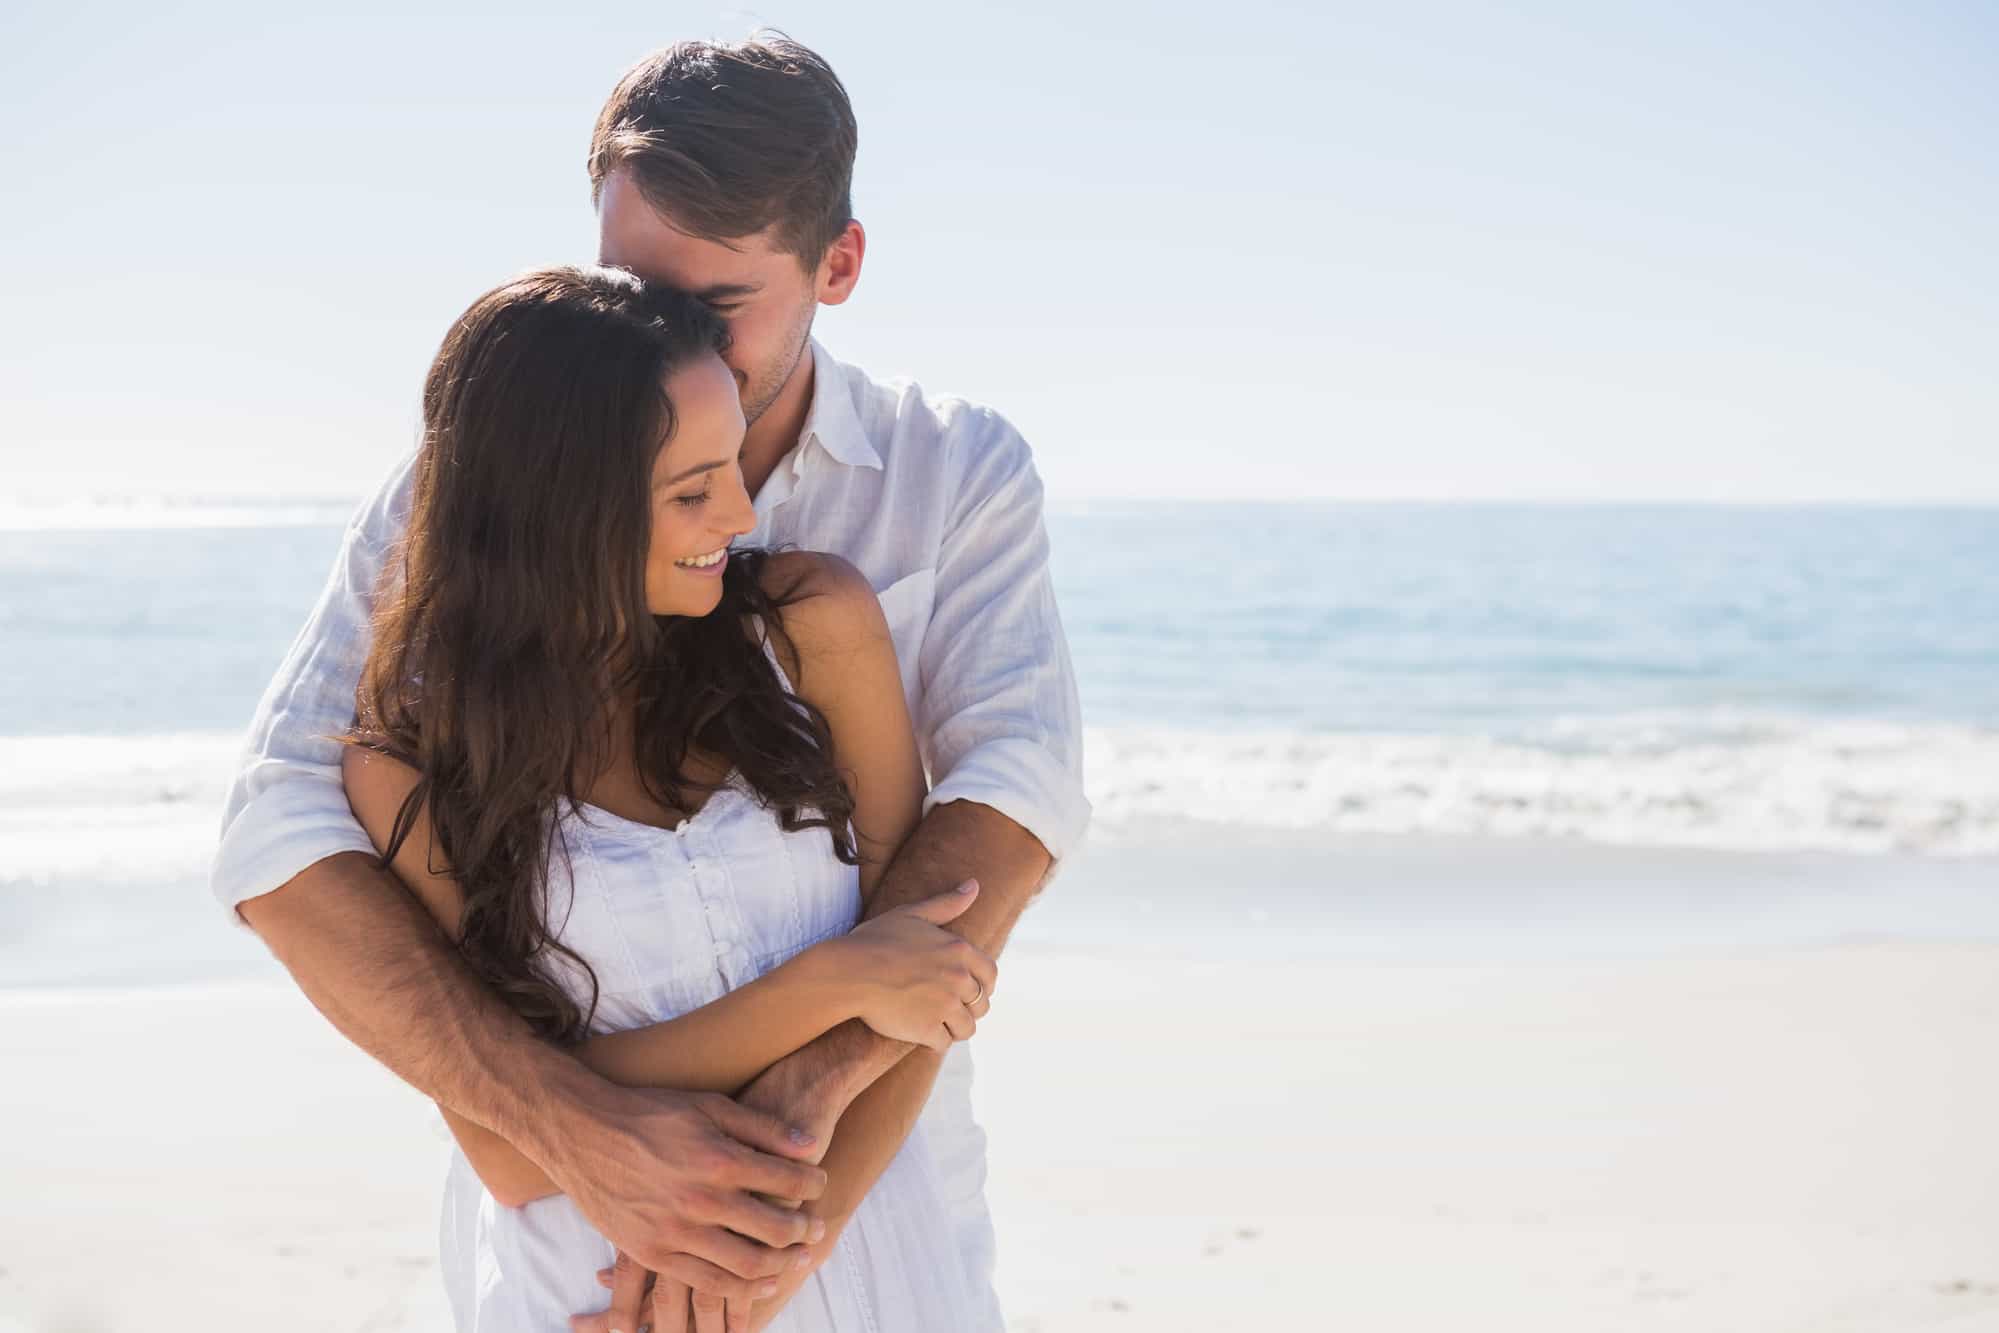 What Does It Mean When A Guy Squeezes You In A Hug (16 Hugs)? 